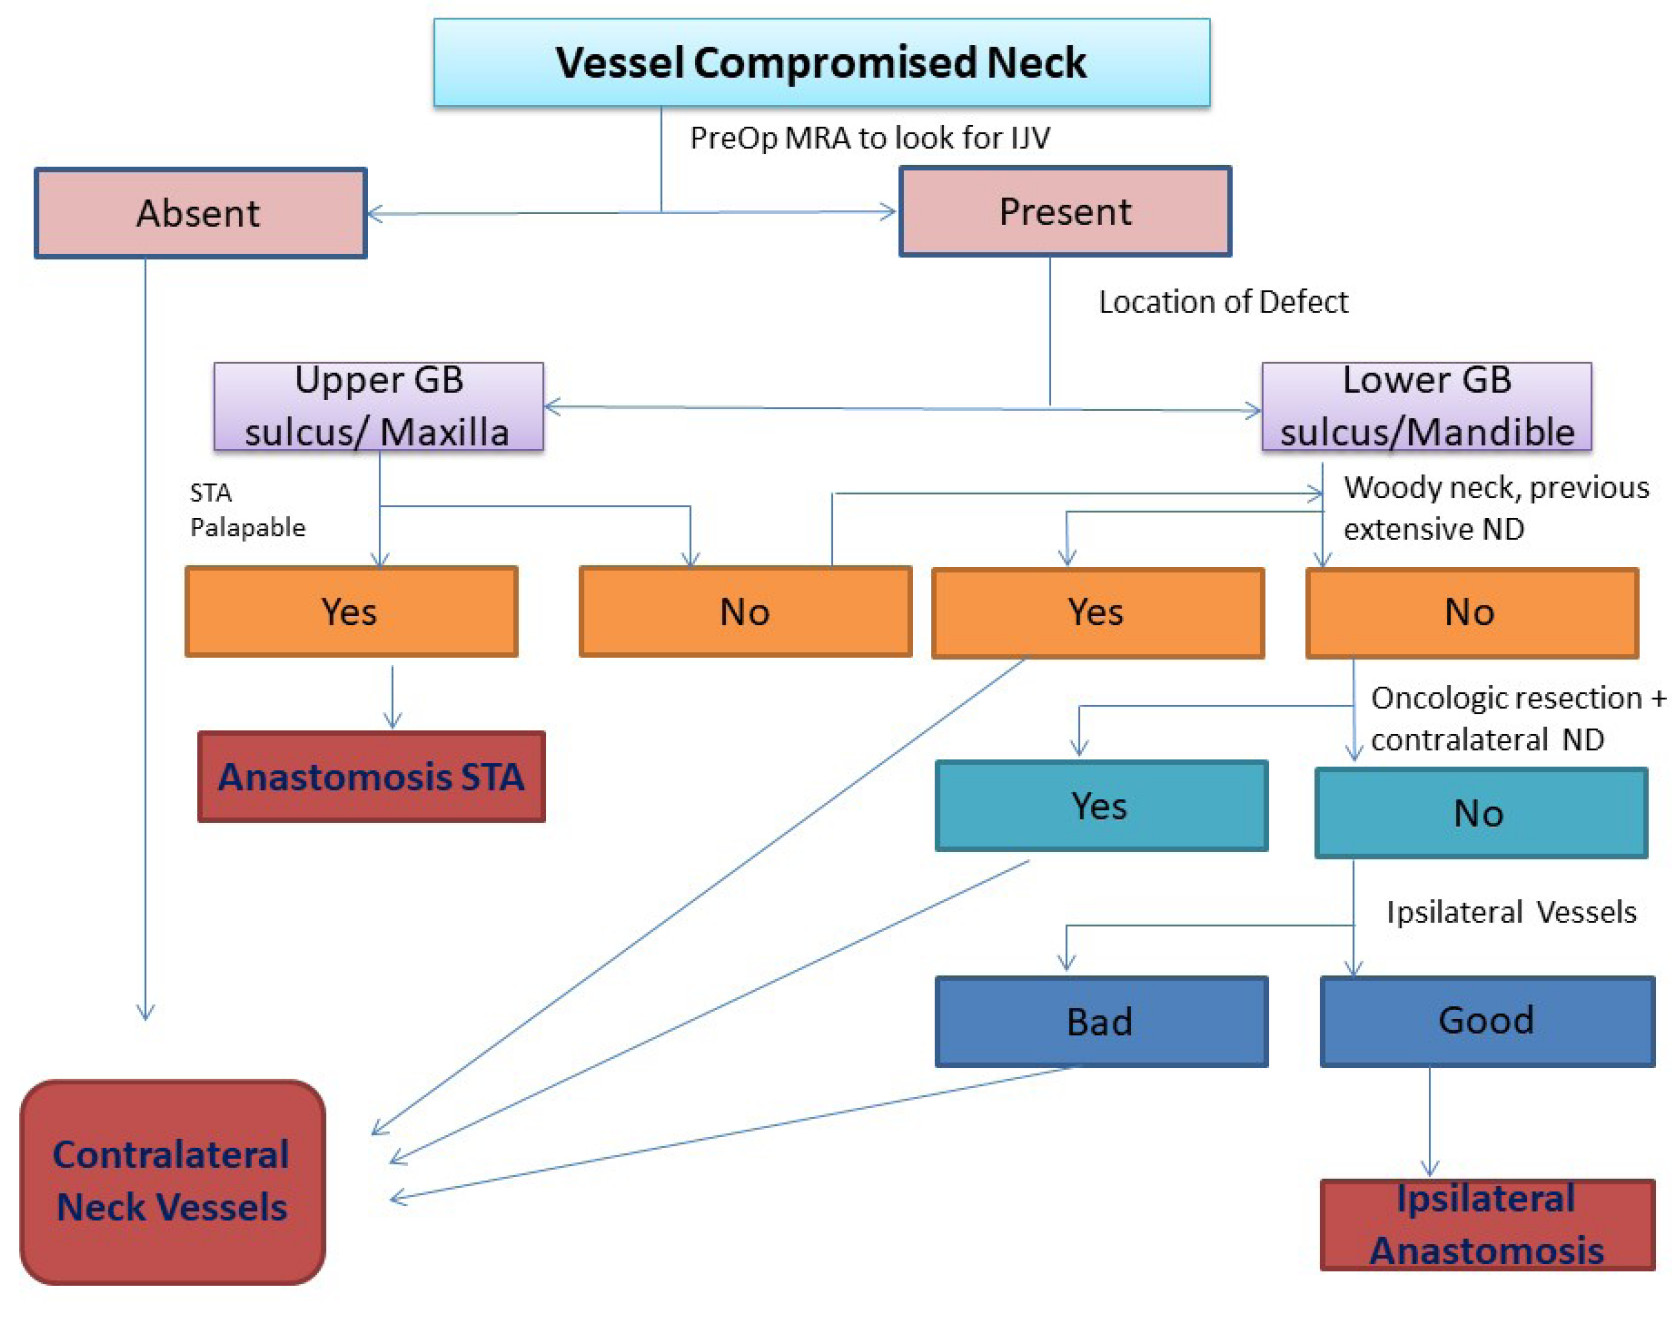 Microvascular Free Tissue Transfer in Vessel-Compromised Neck: Techniques and Recommendations